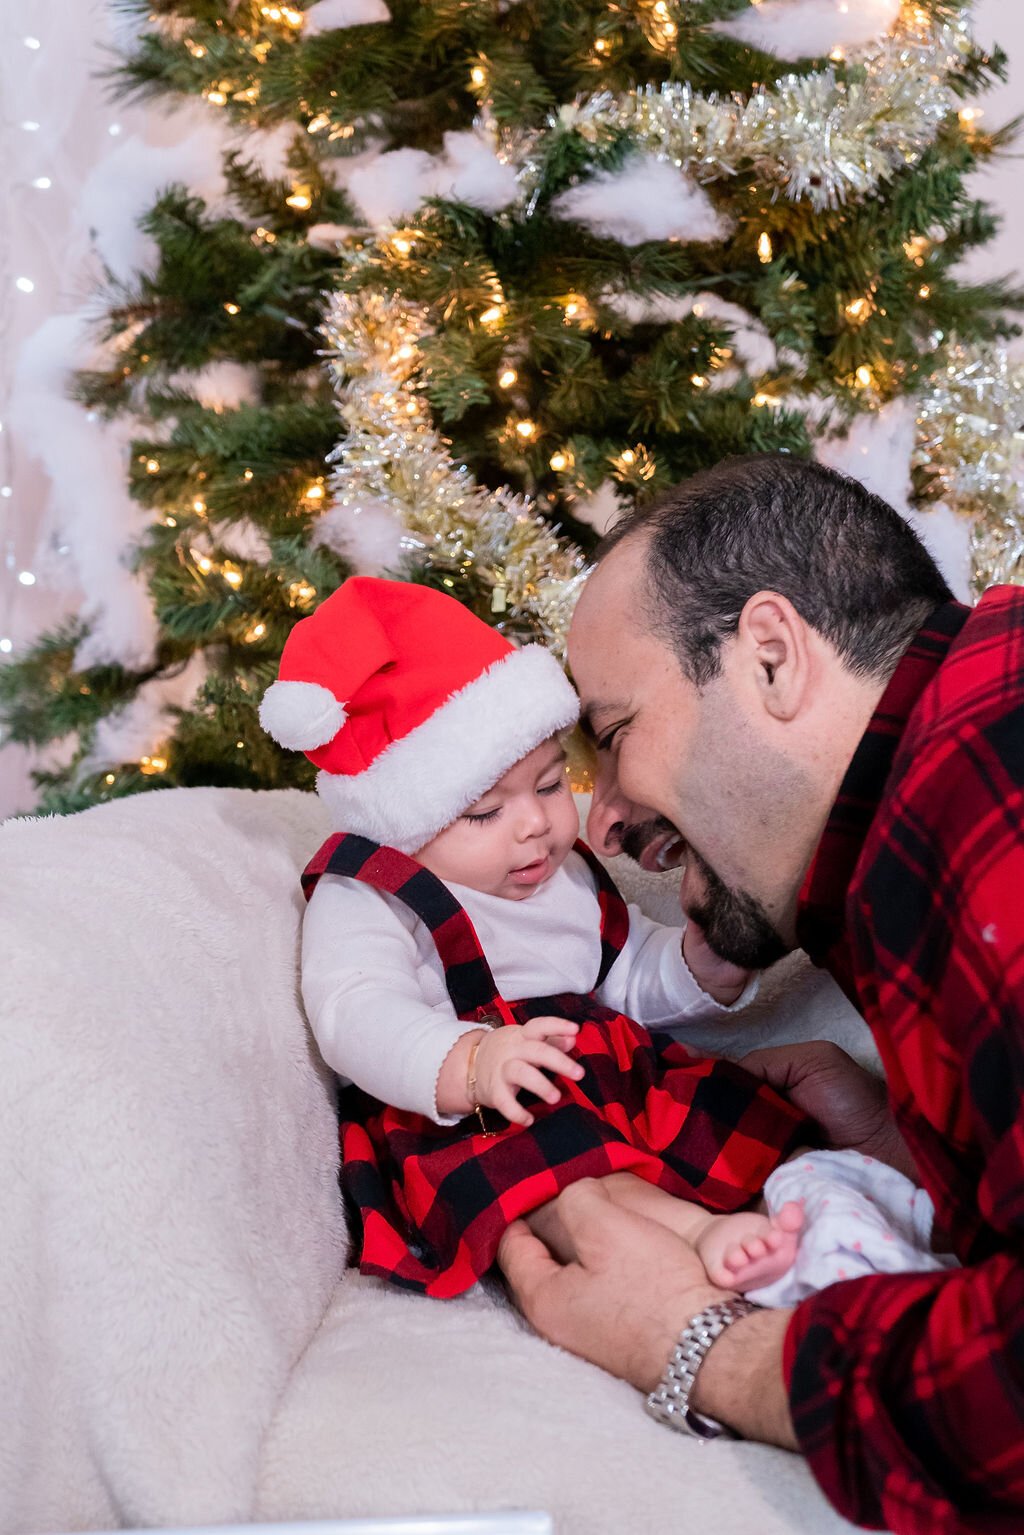 baby-and-dad-photo, holiday-photography, baby-in-santa-hat-photography, baby-and-christmas-tree, plaid-holiday-baby-outfit